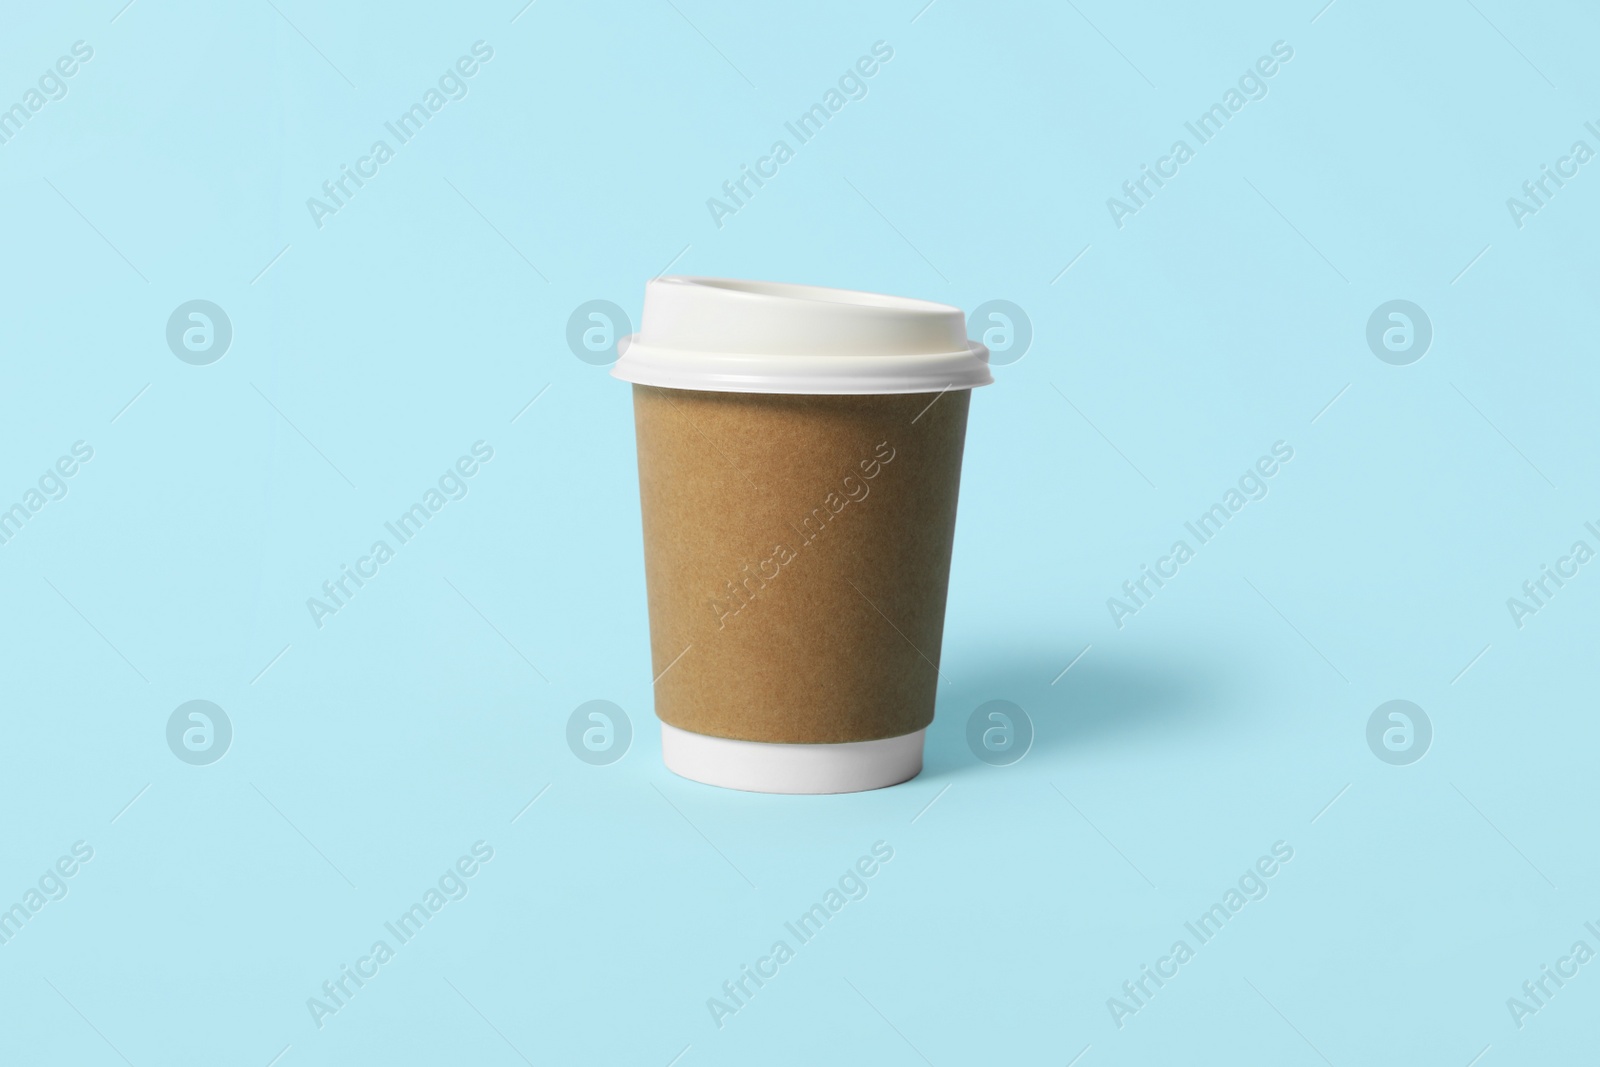 Photo of Takeaway paper coffee cup on light blue background